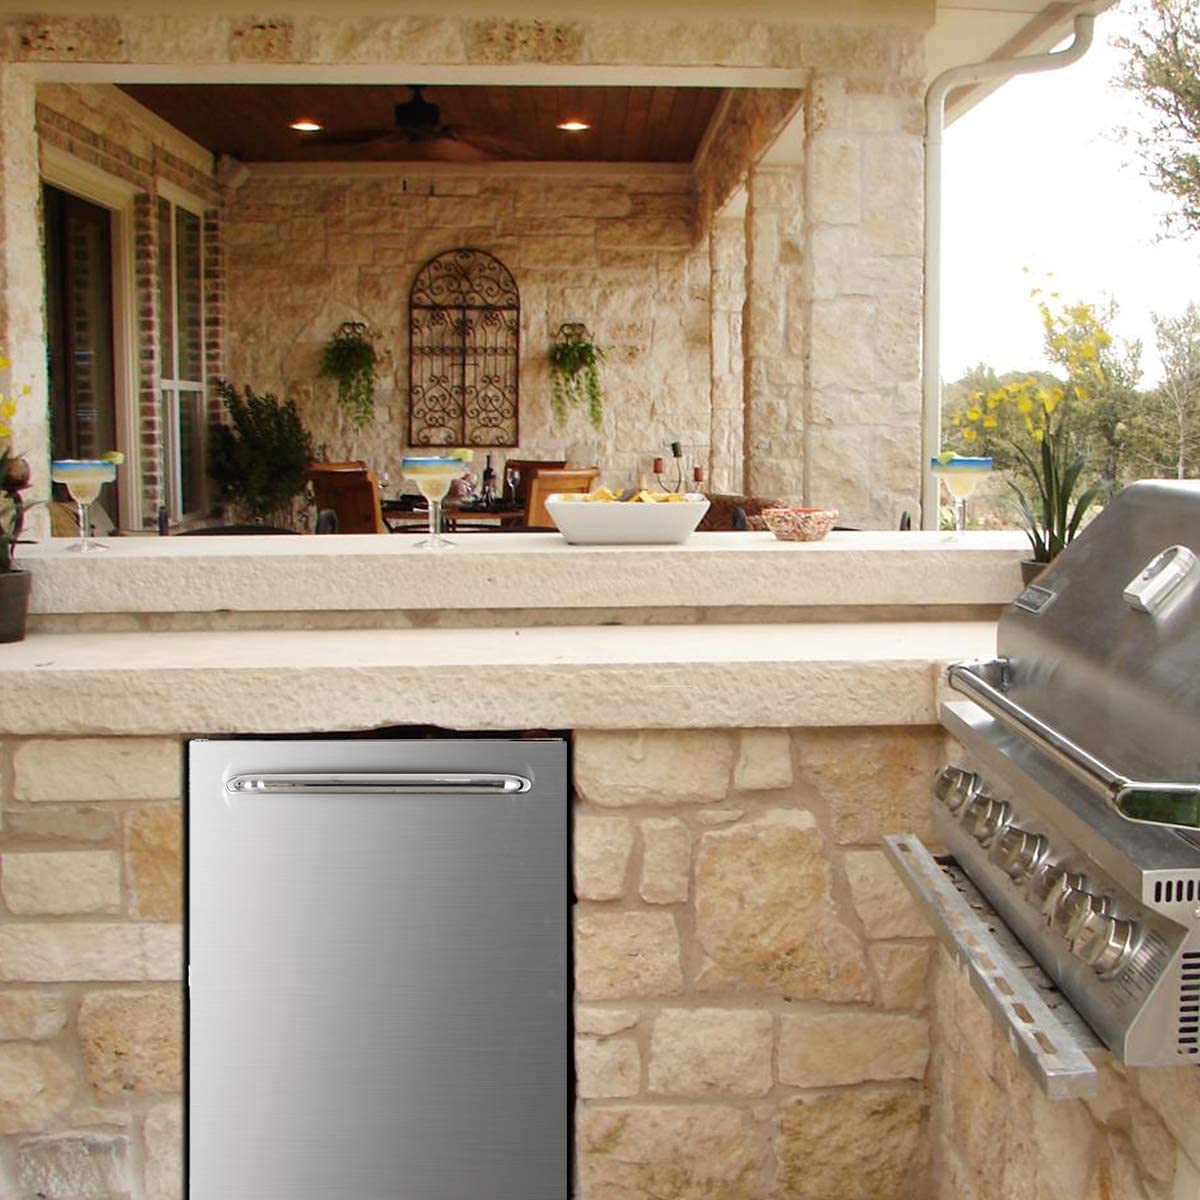 Side view of an outdoor setting with a 5.12 Cu Ft Undercounter Beverage Outdoor Refrigerator 161 Cans installed in a suitable position against a brick surface beside a barbecue grill